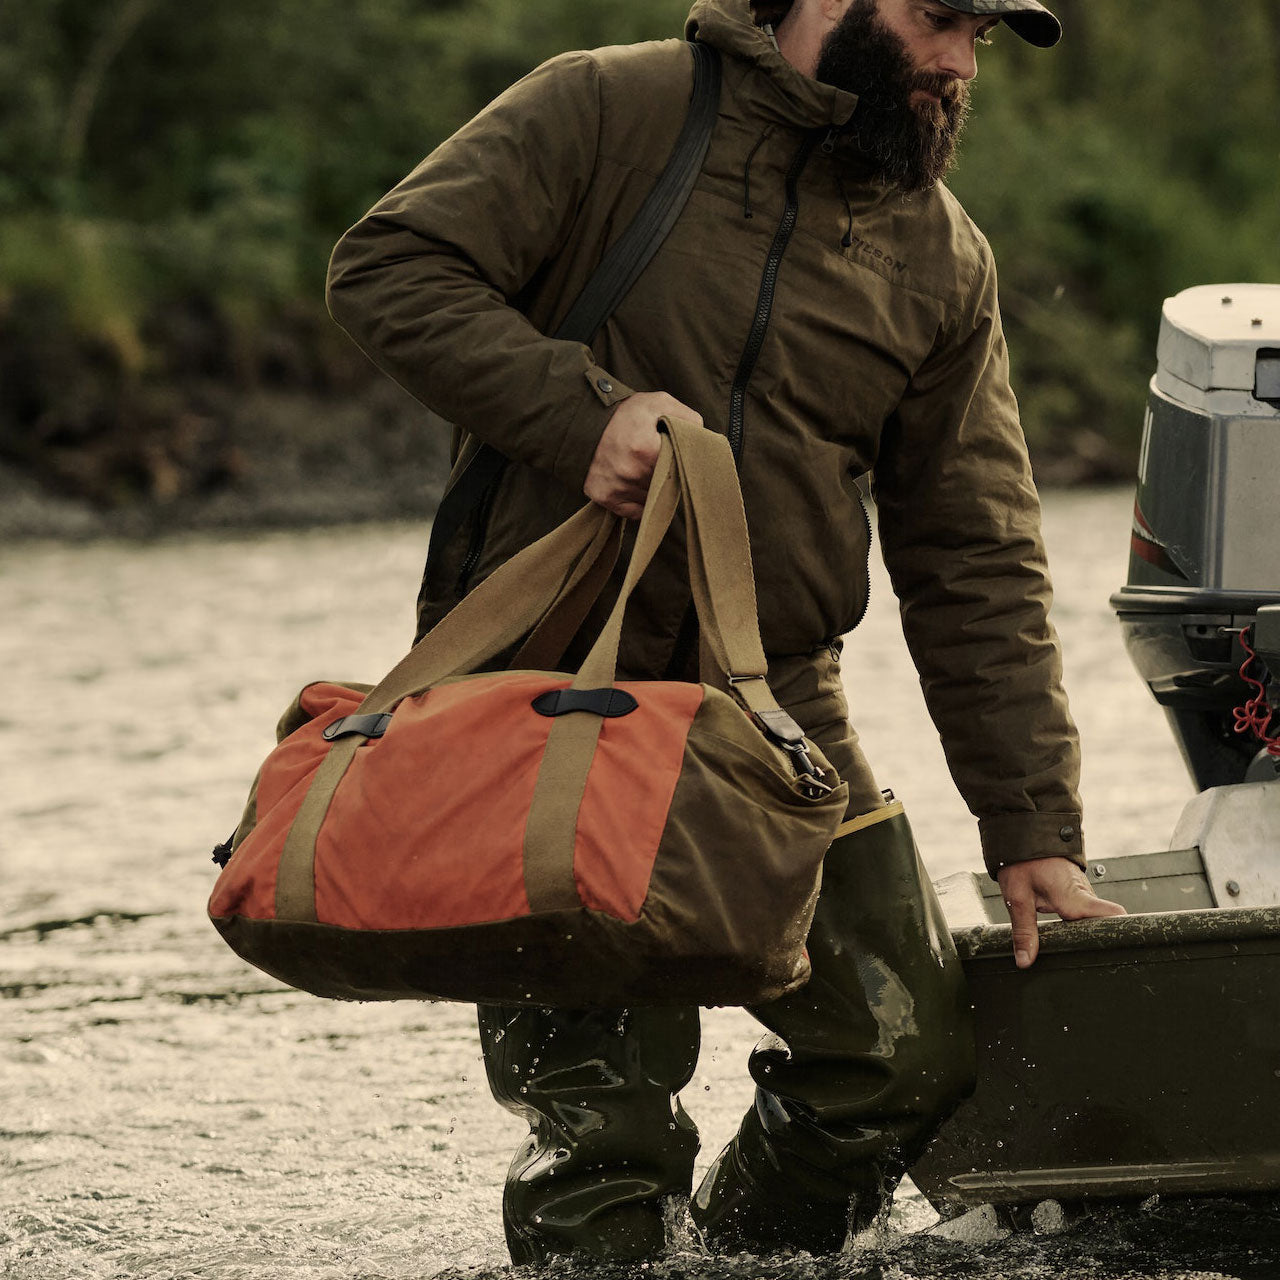 Filson Dry Day Backpack and Duffle